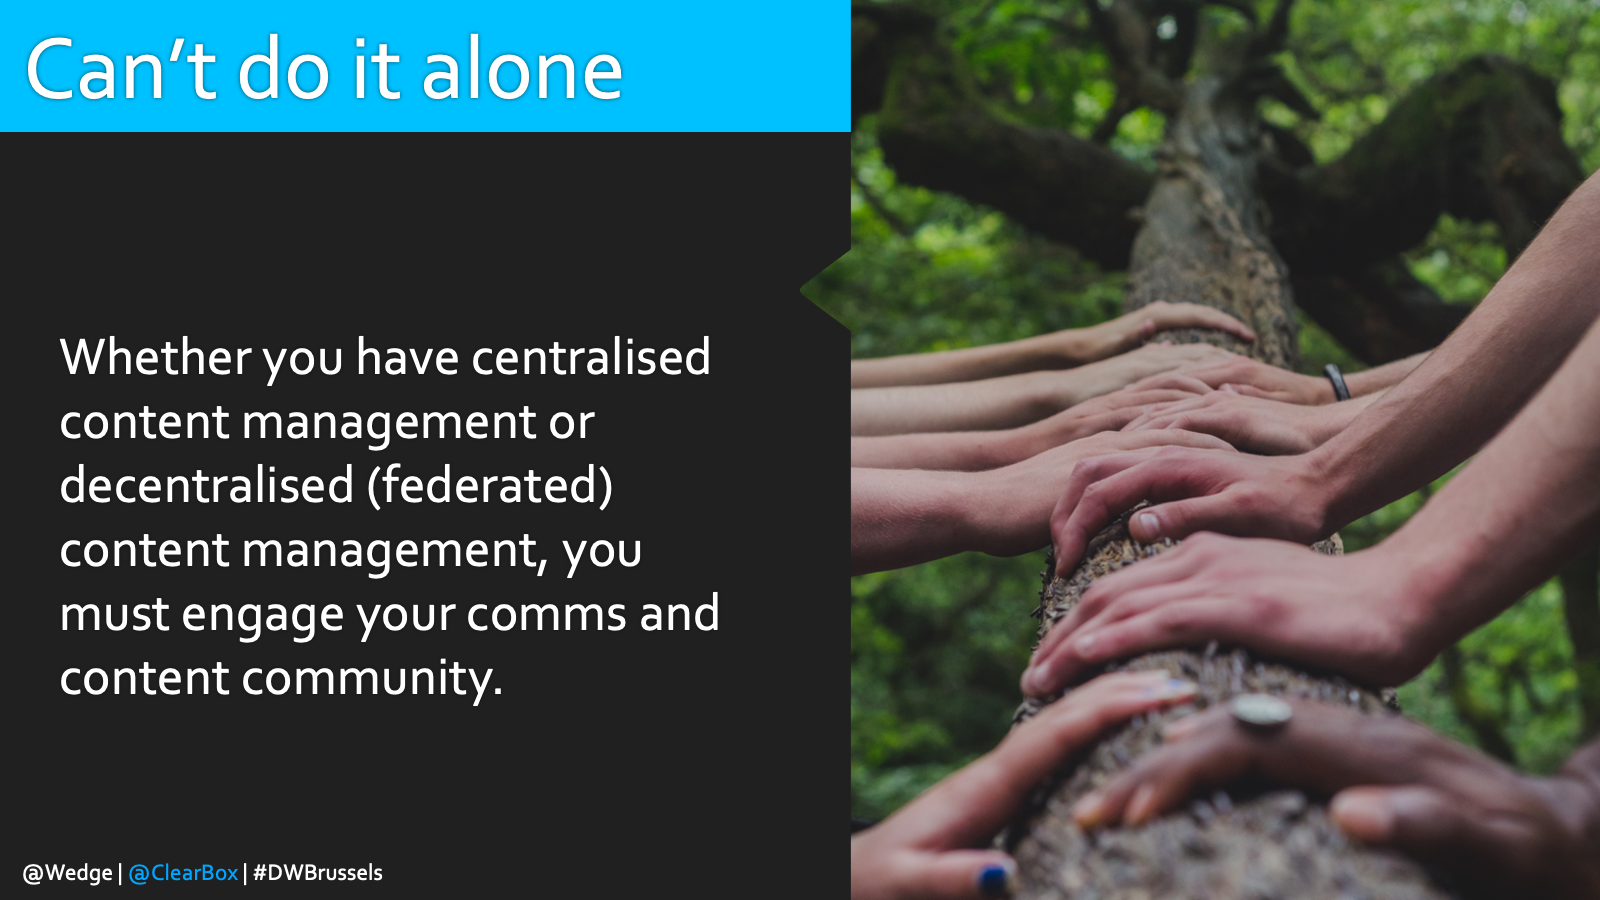 Whether you have centralised content management or decentralised (federated) content management, you must engage your comms and content community.